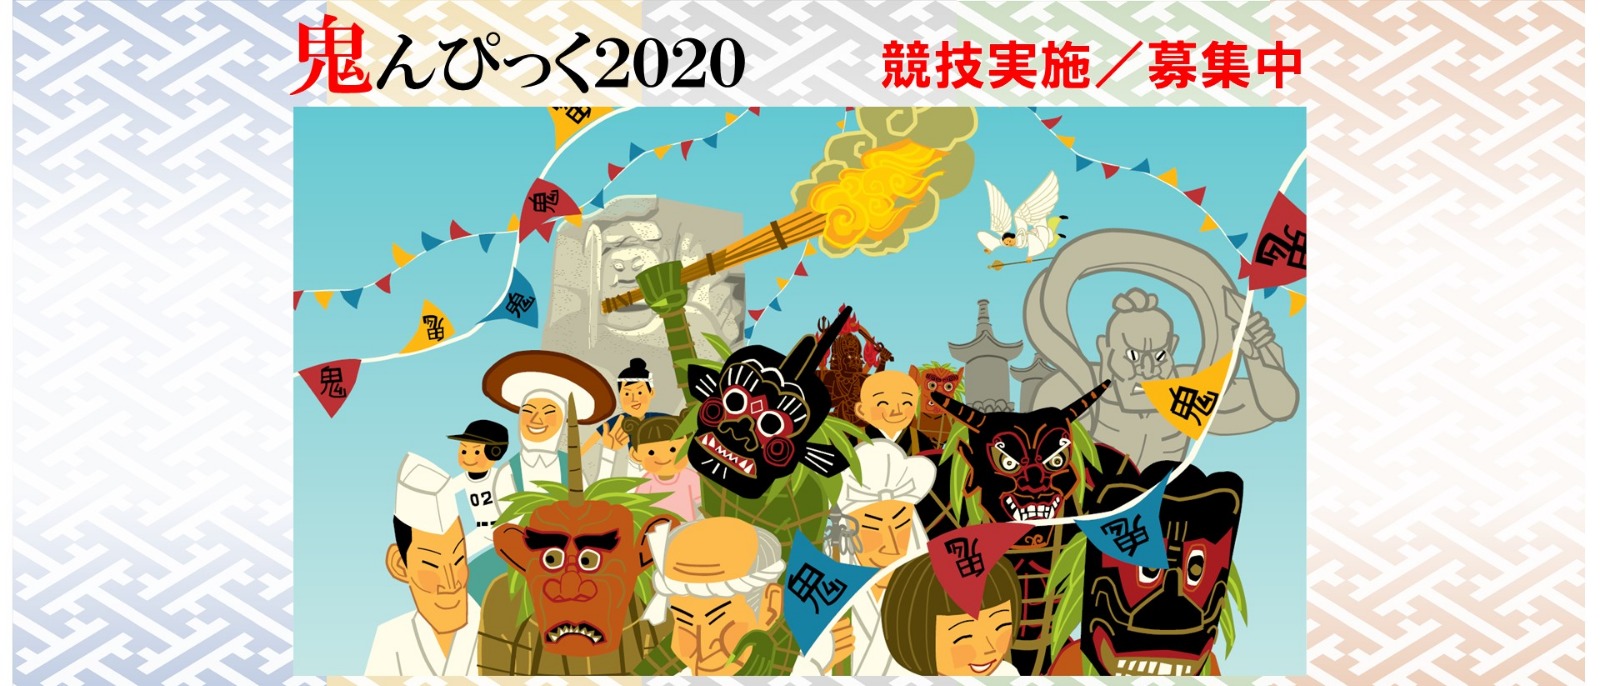 Onimpic 2020（Kunisaki Onimpic Games 2020）Recruitment of Onimpic competition events 